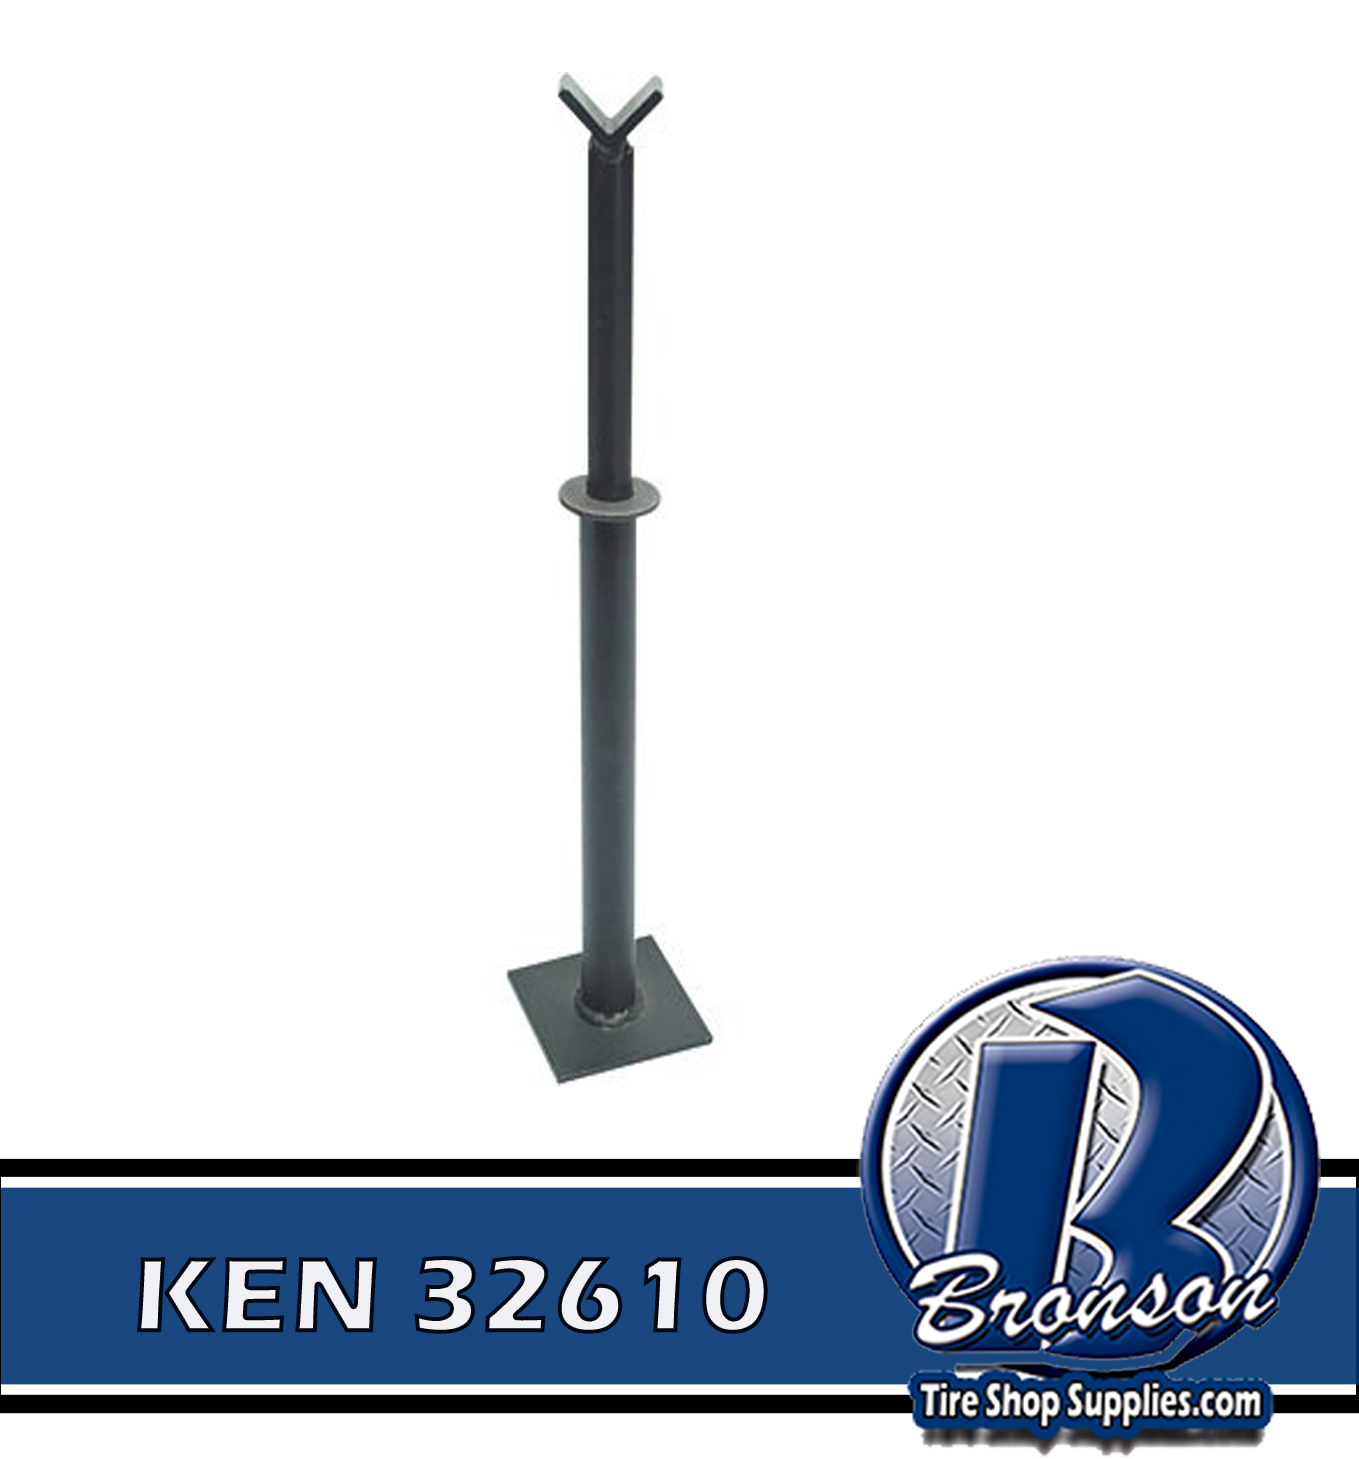 KEN 32610 WRENCH SUPPORT STAND